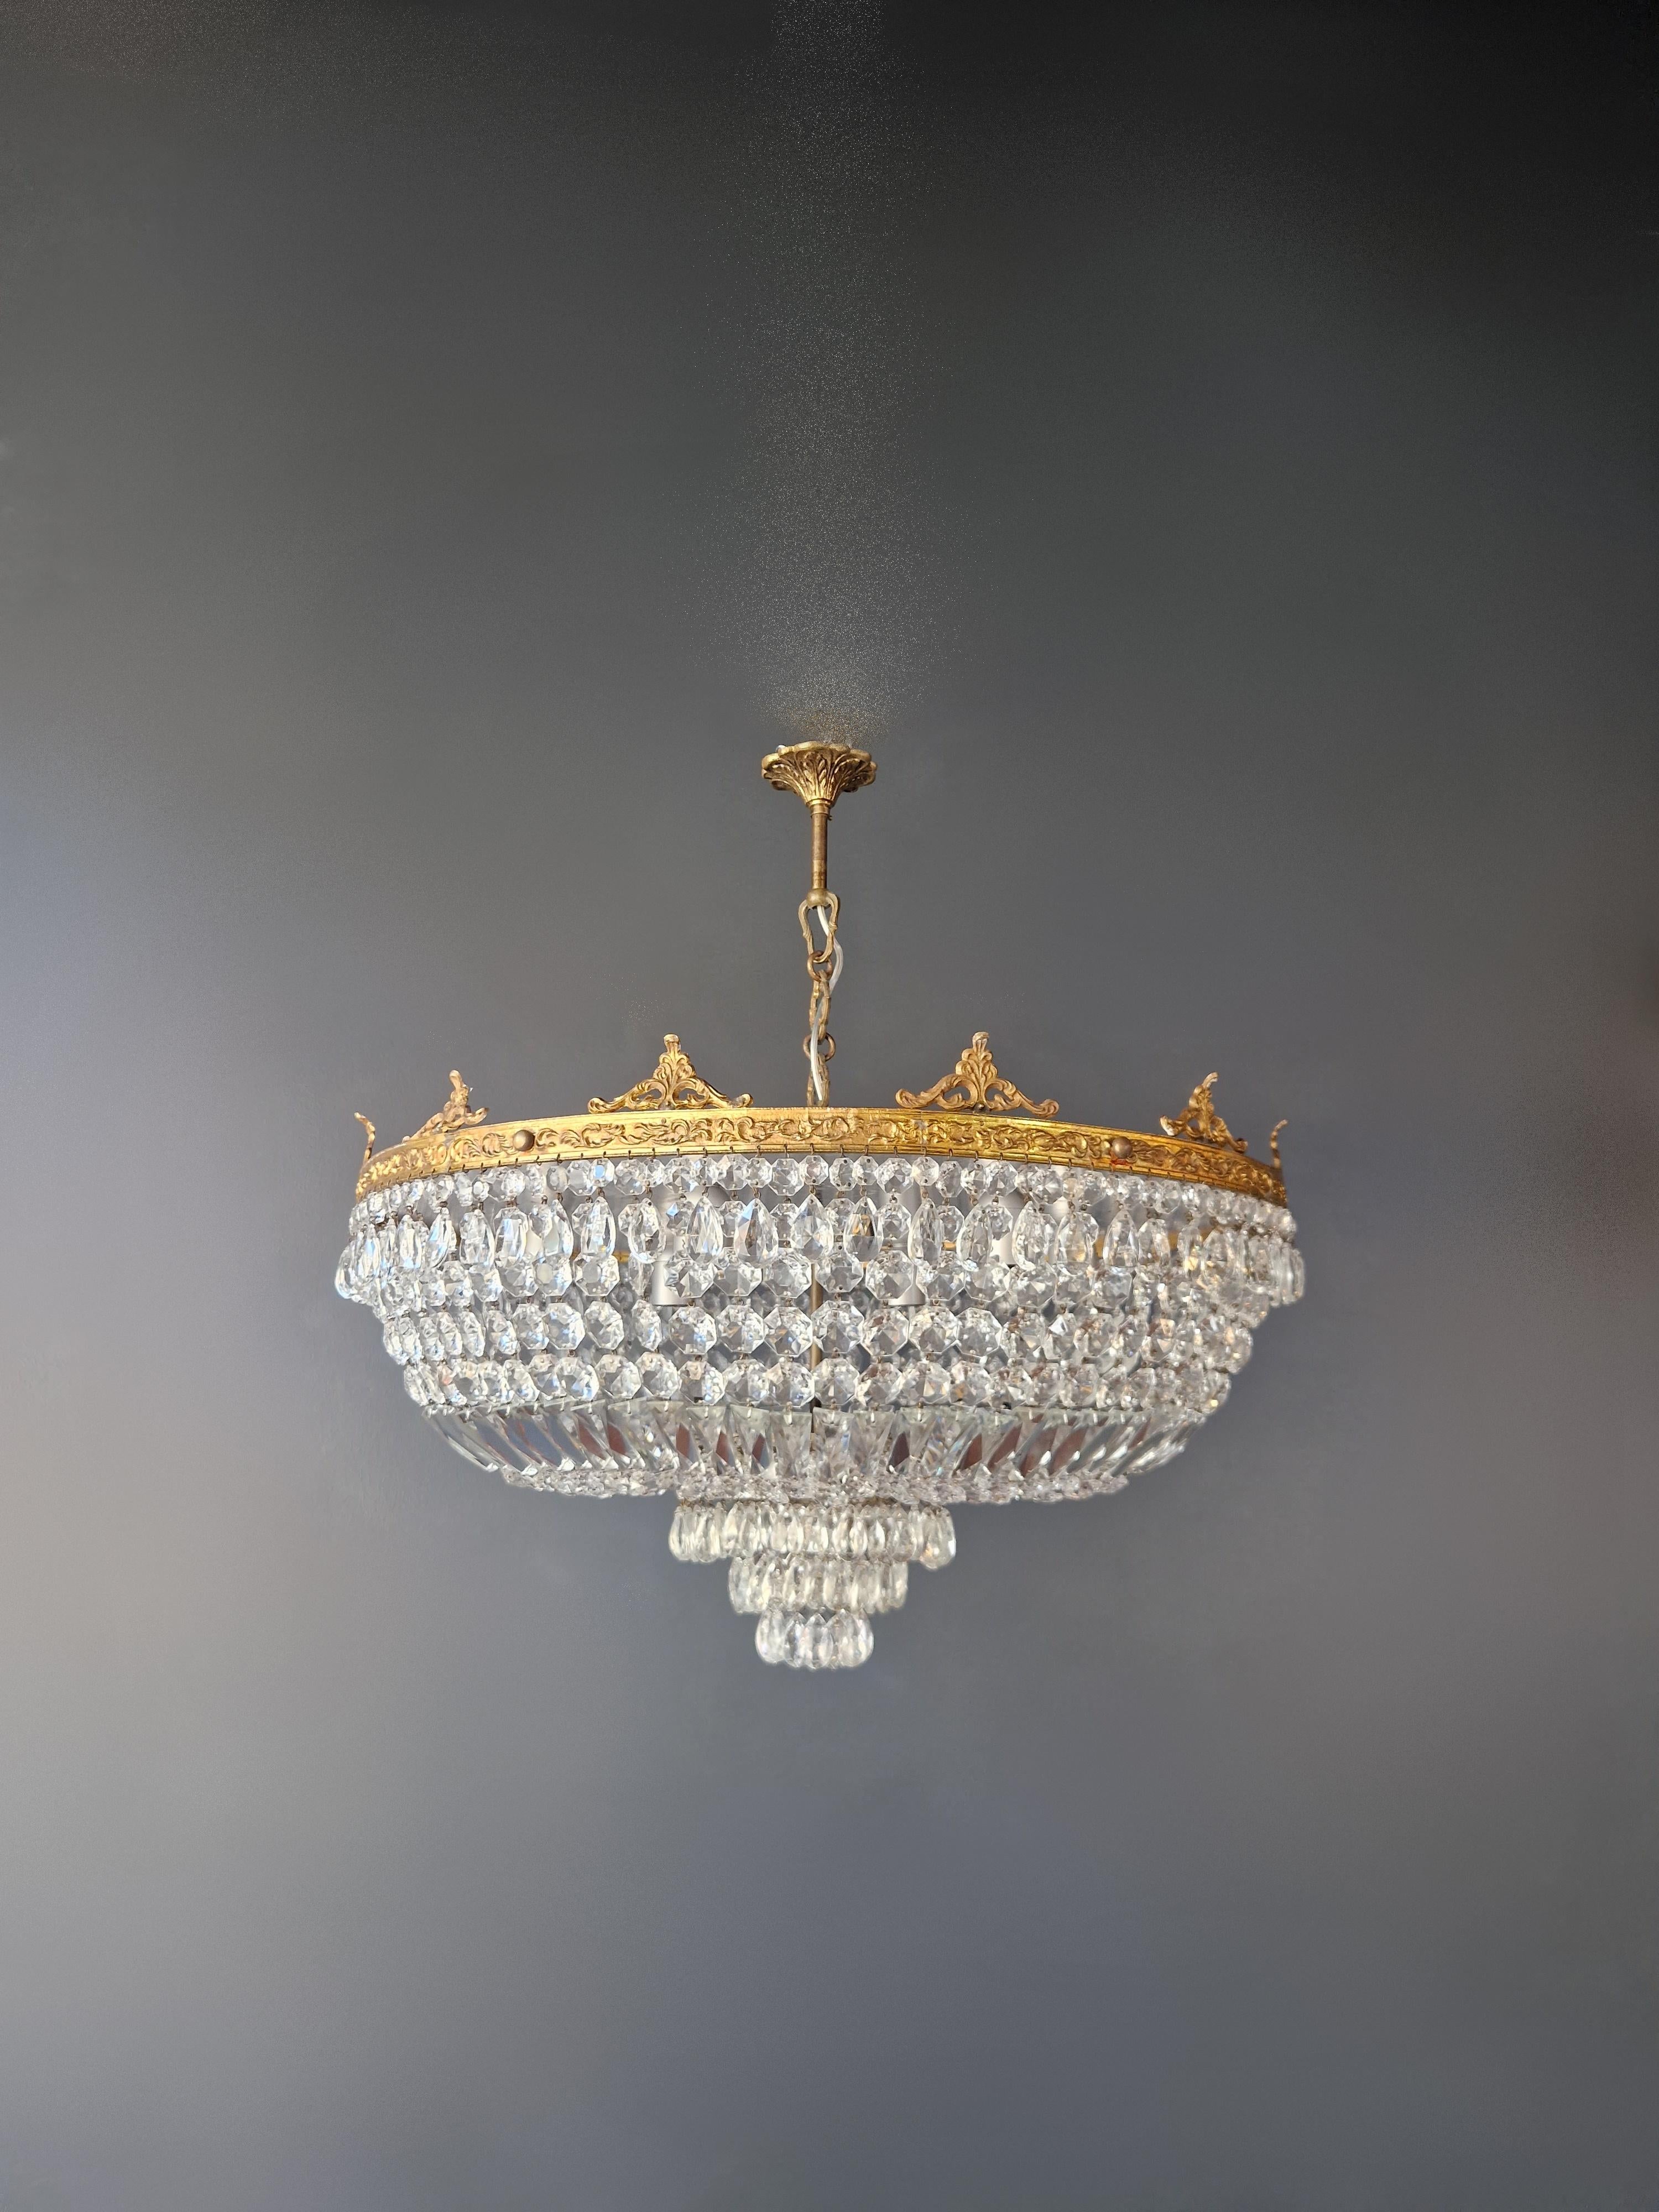 Exquisite Antique Chandelier: A Restored Masterpiece from the Past

Discover the allure of a bygone era with our meticulously restored antique chandelier, a true labor of love from Berlin. Carefully adapted to meet US electrical standards, this